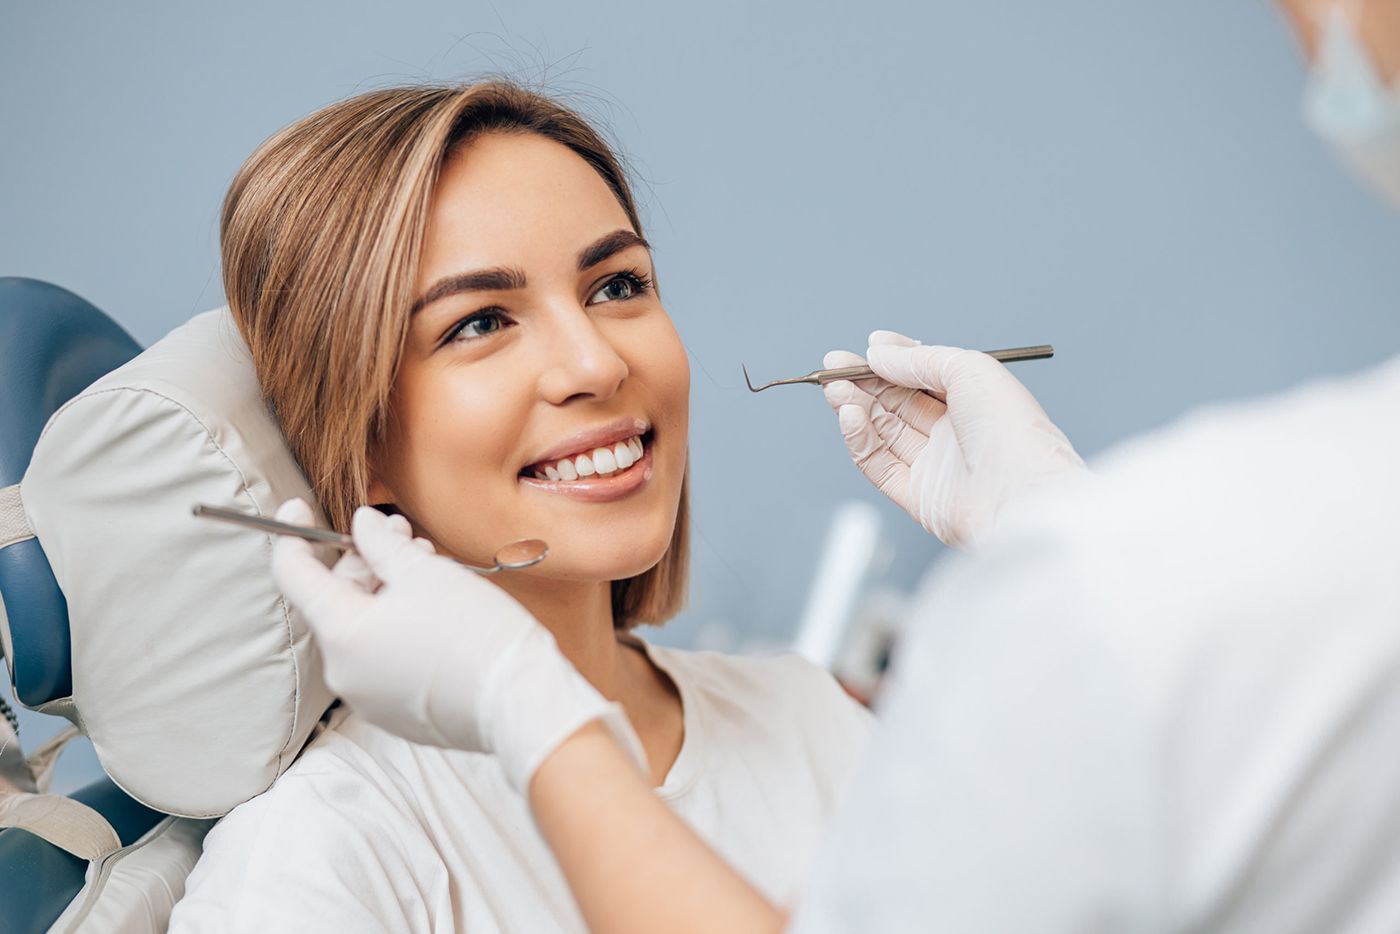 Cosmetic Dentistry: Everything You Need to Know About Costs and Types